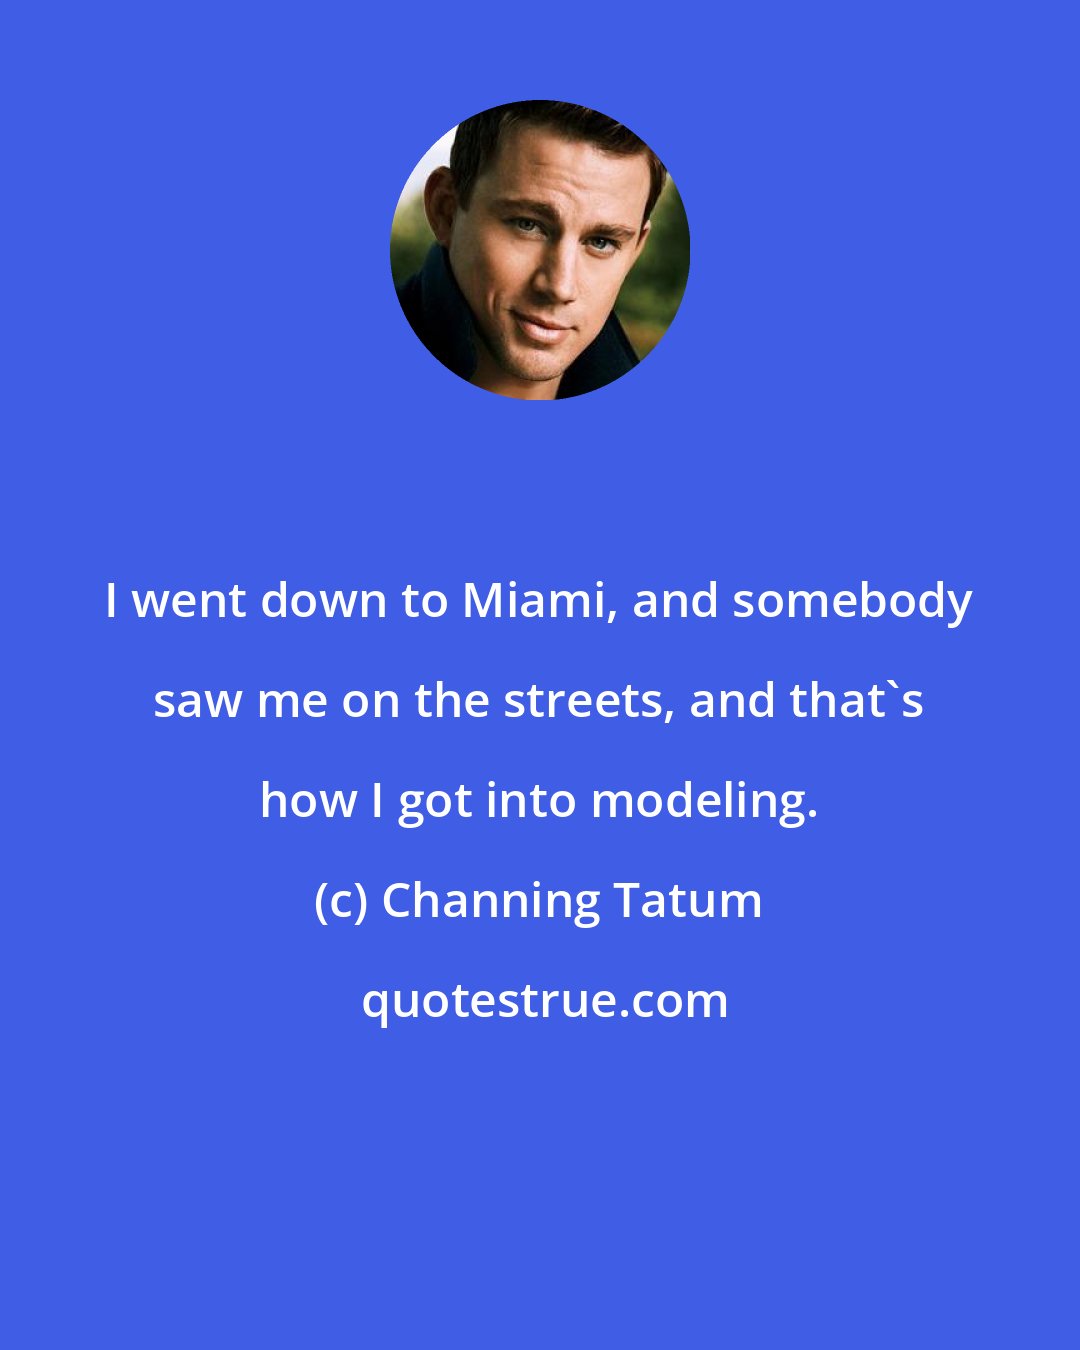 Channing Tatum: I went down to Miami, and somebody saw me on the streets, and that's how I got into modeling.